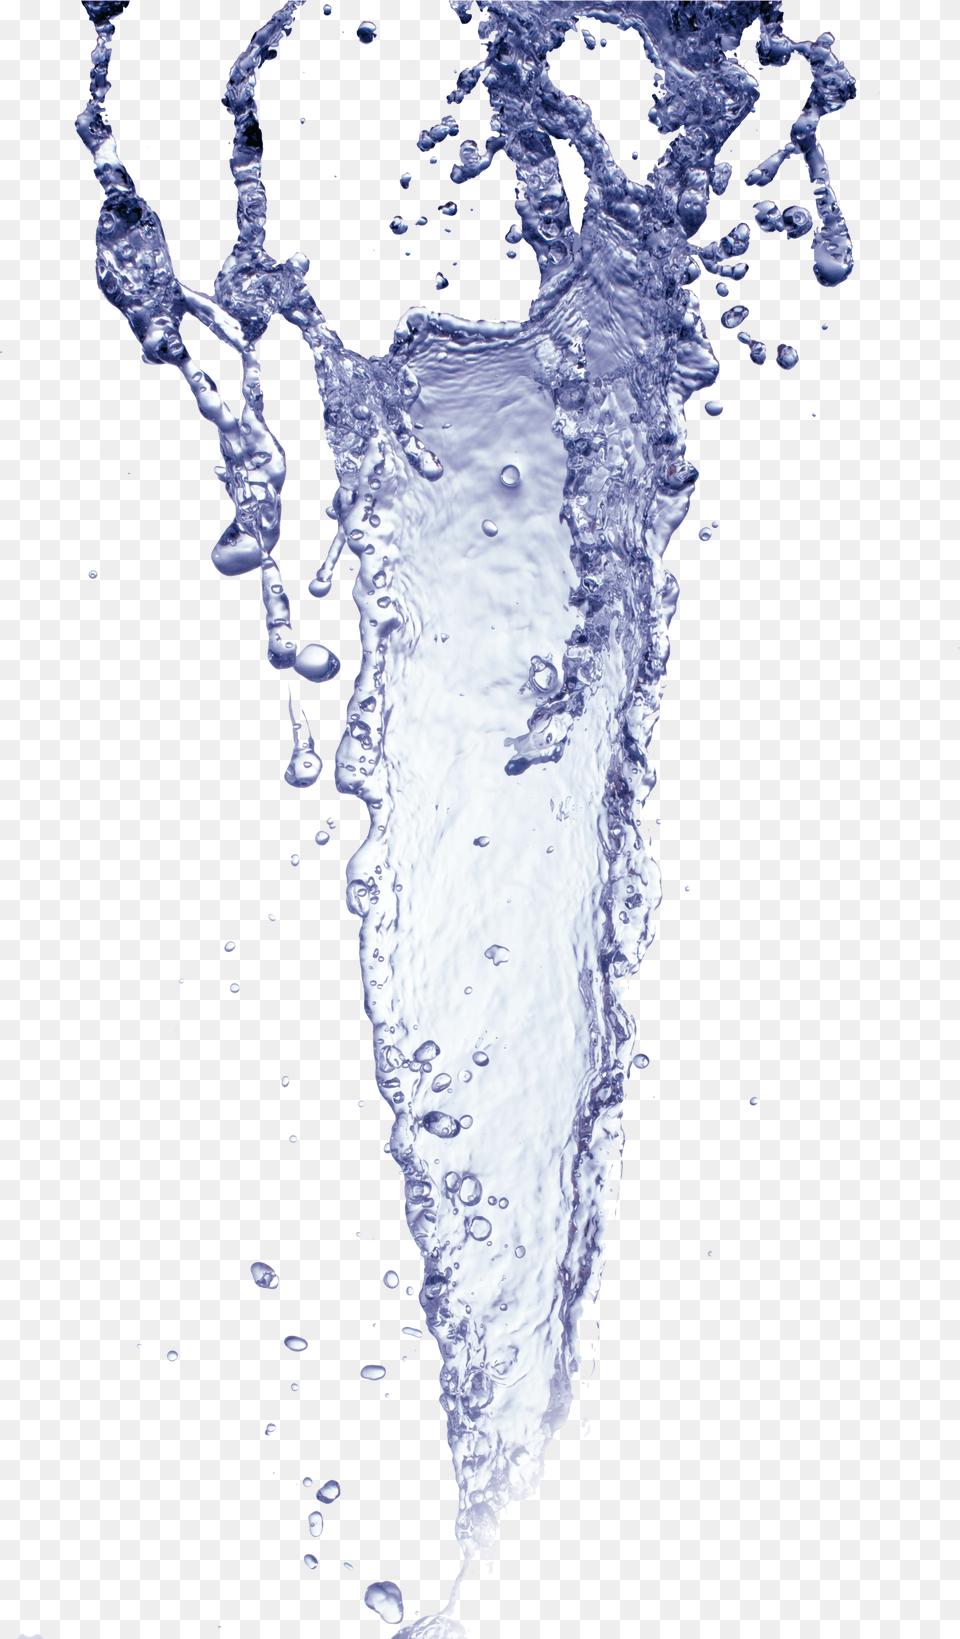 Water Images And Background Water Spilling, Outdoors, Ice, Nature, Wedding Free Png Download